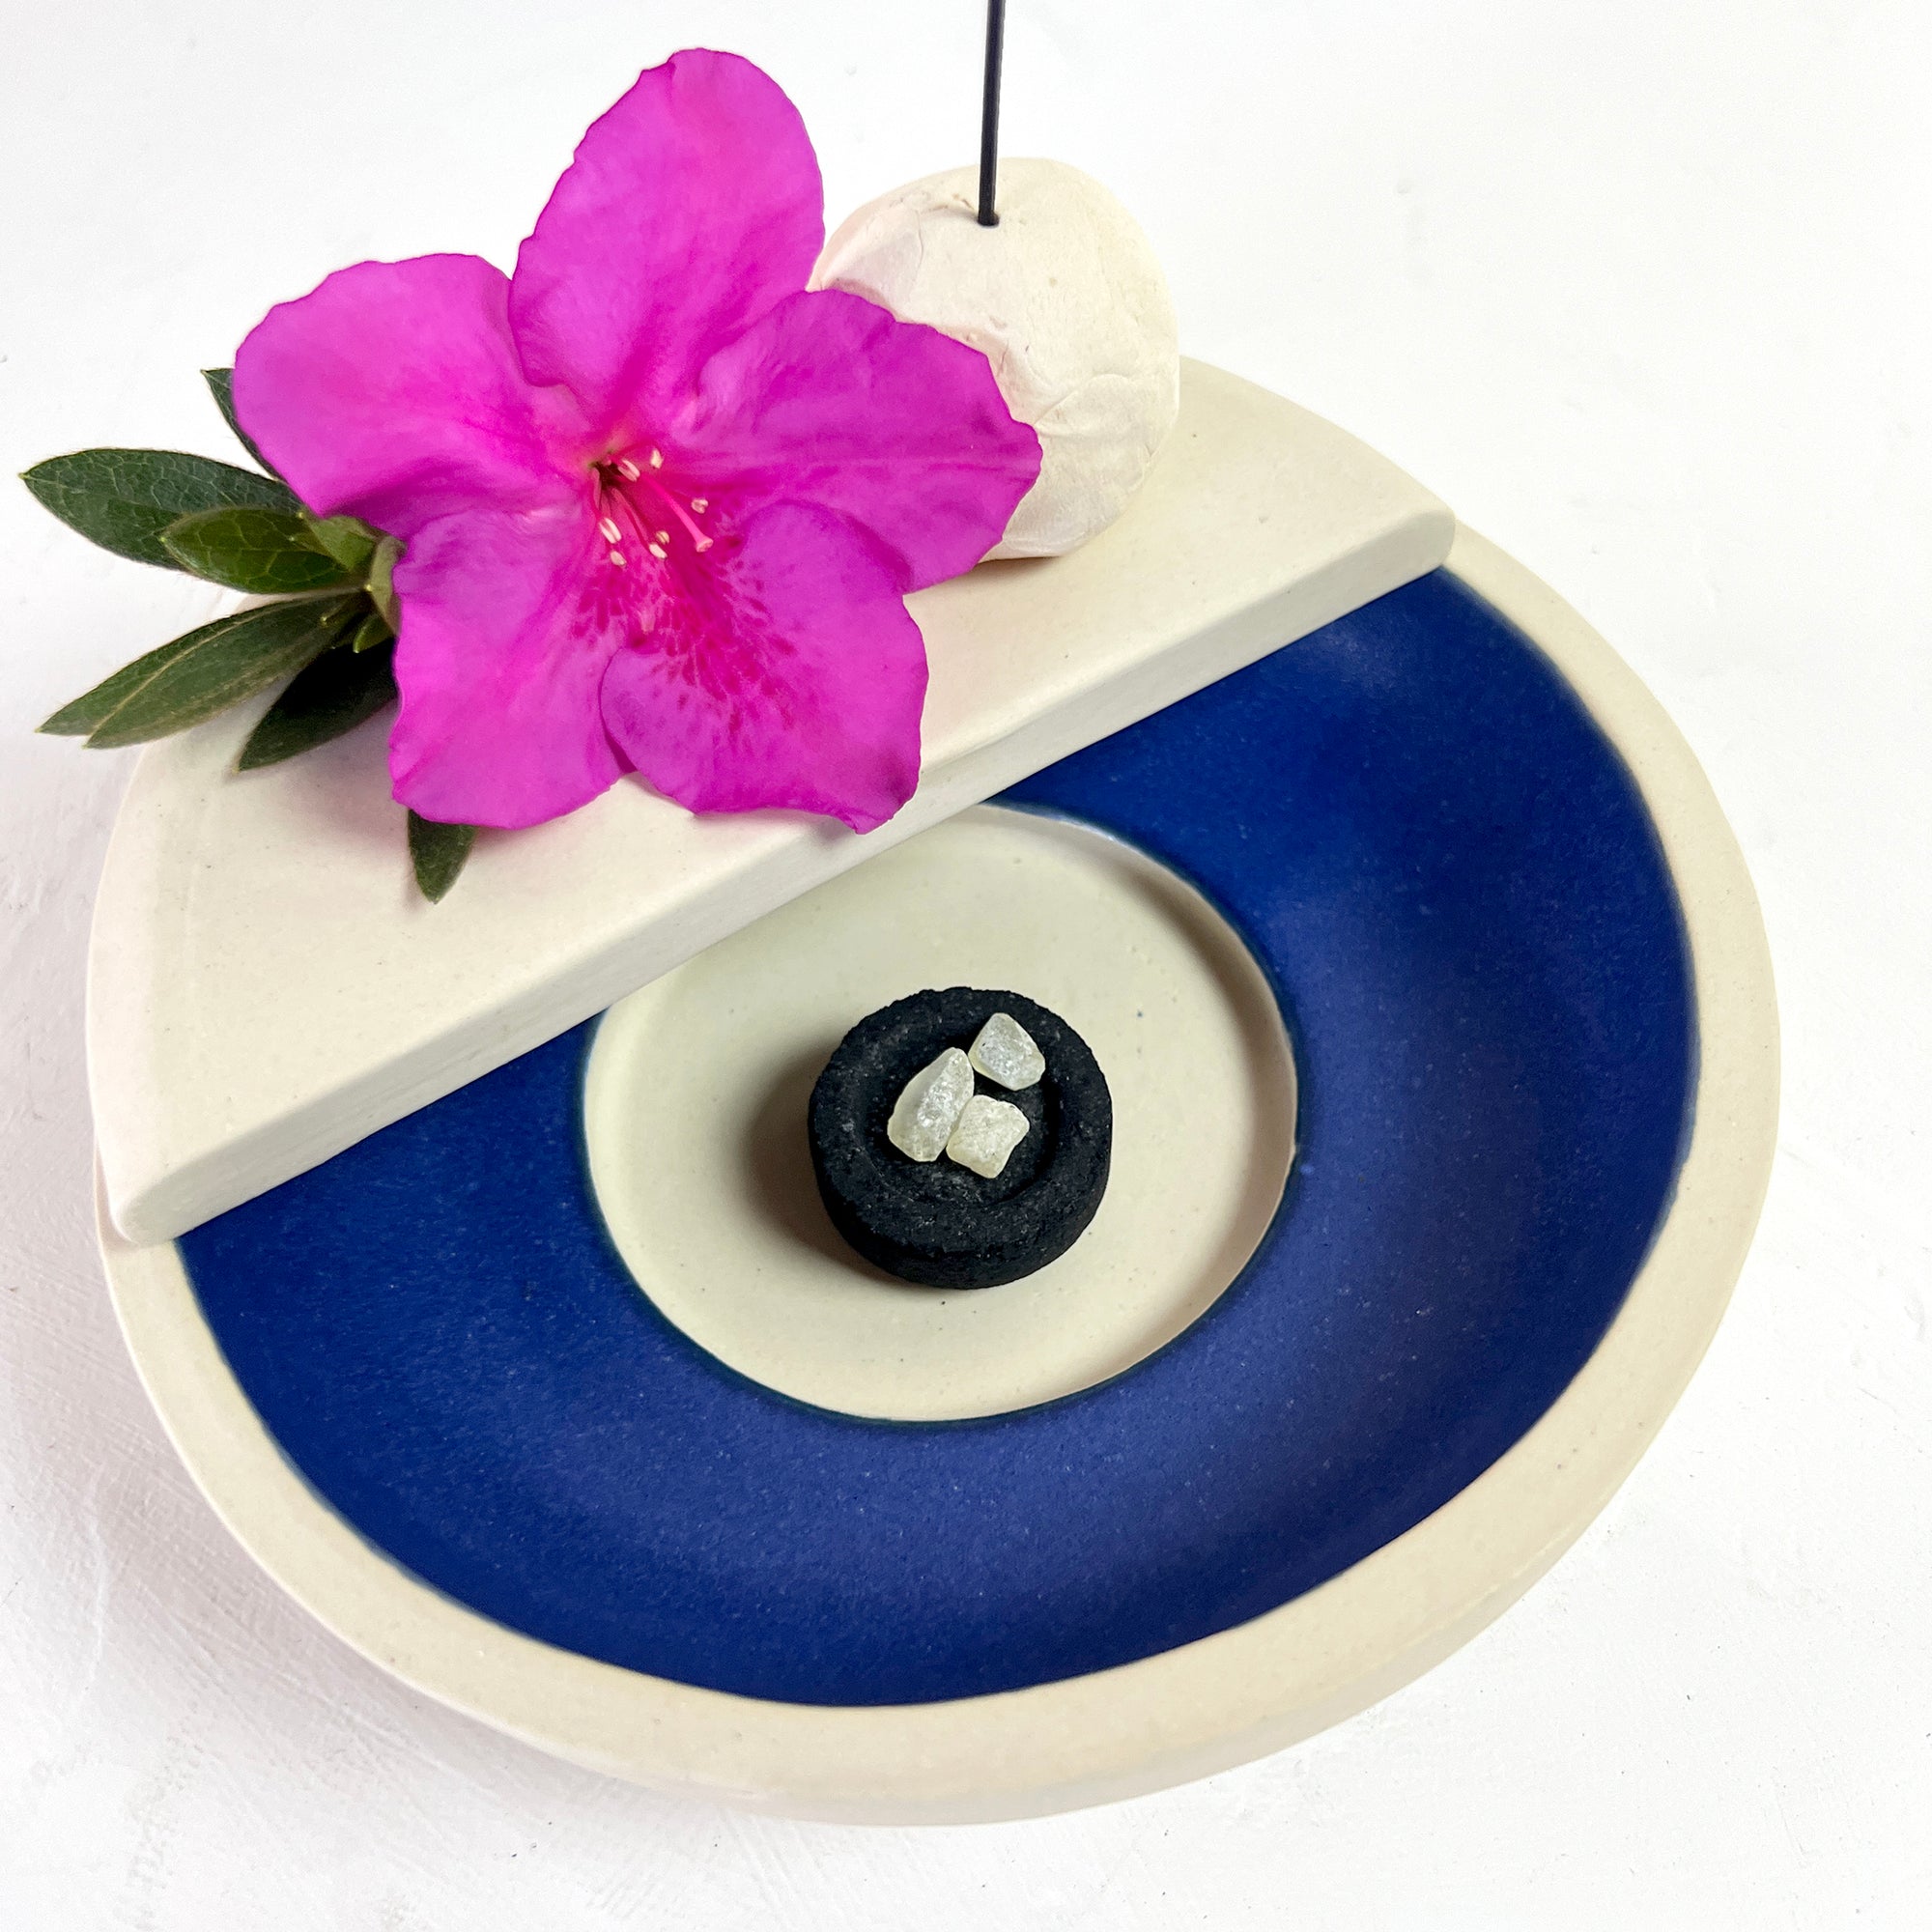 Temple Crucible in Sapphire and Cream - Incense Burner and Altar